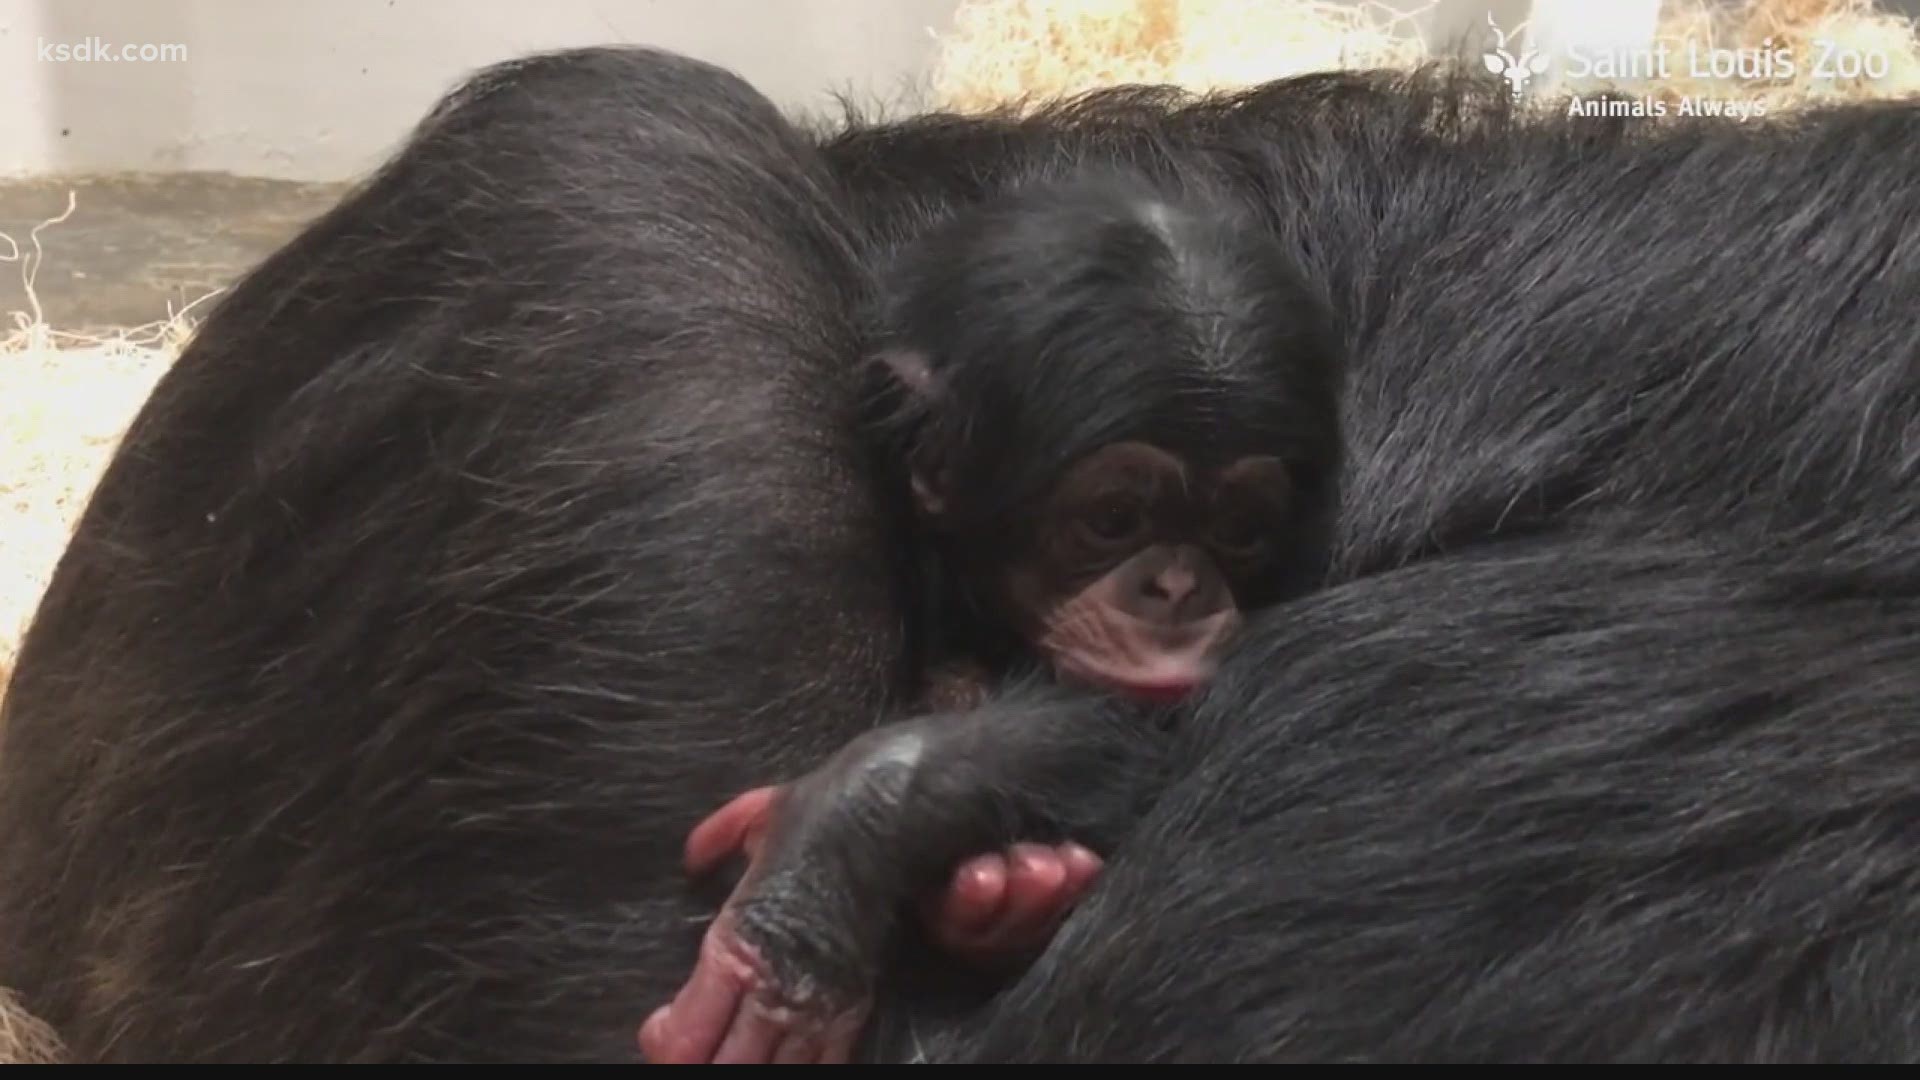 Chimpanzee Utamu gave birth to a little girl at about 3:30 a.m. Wednesday, the zoo announced.